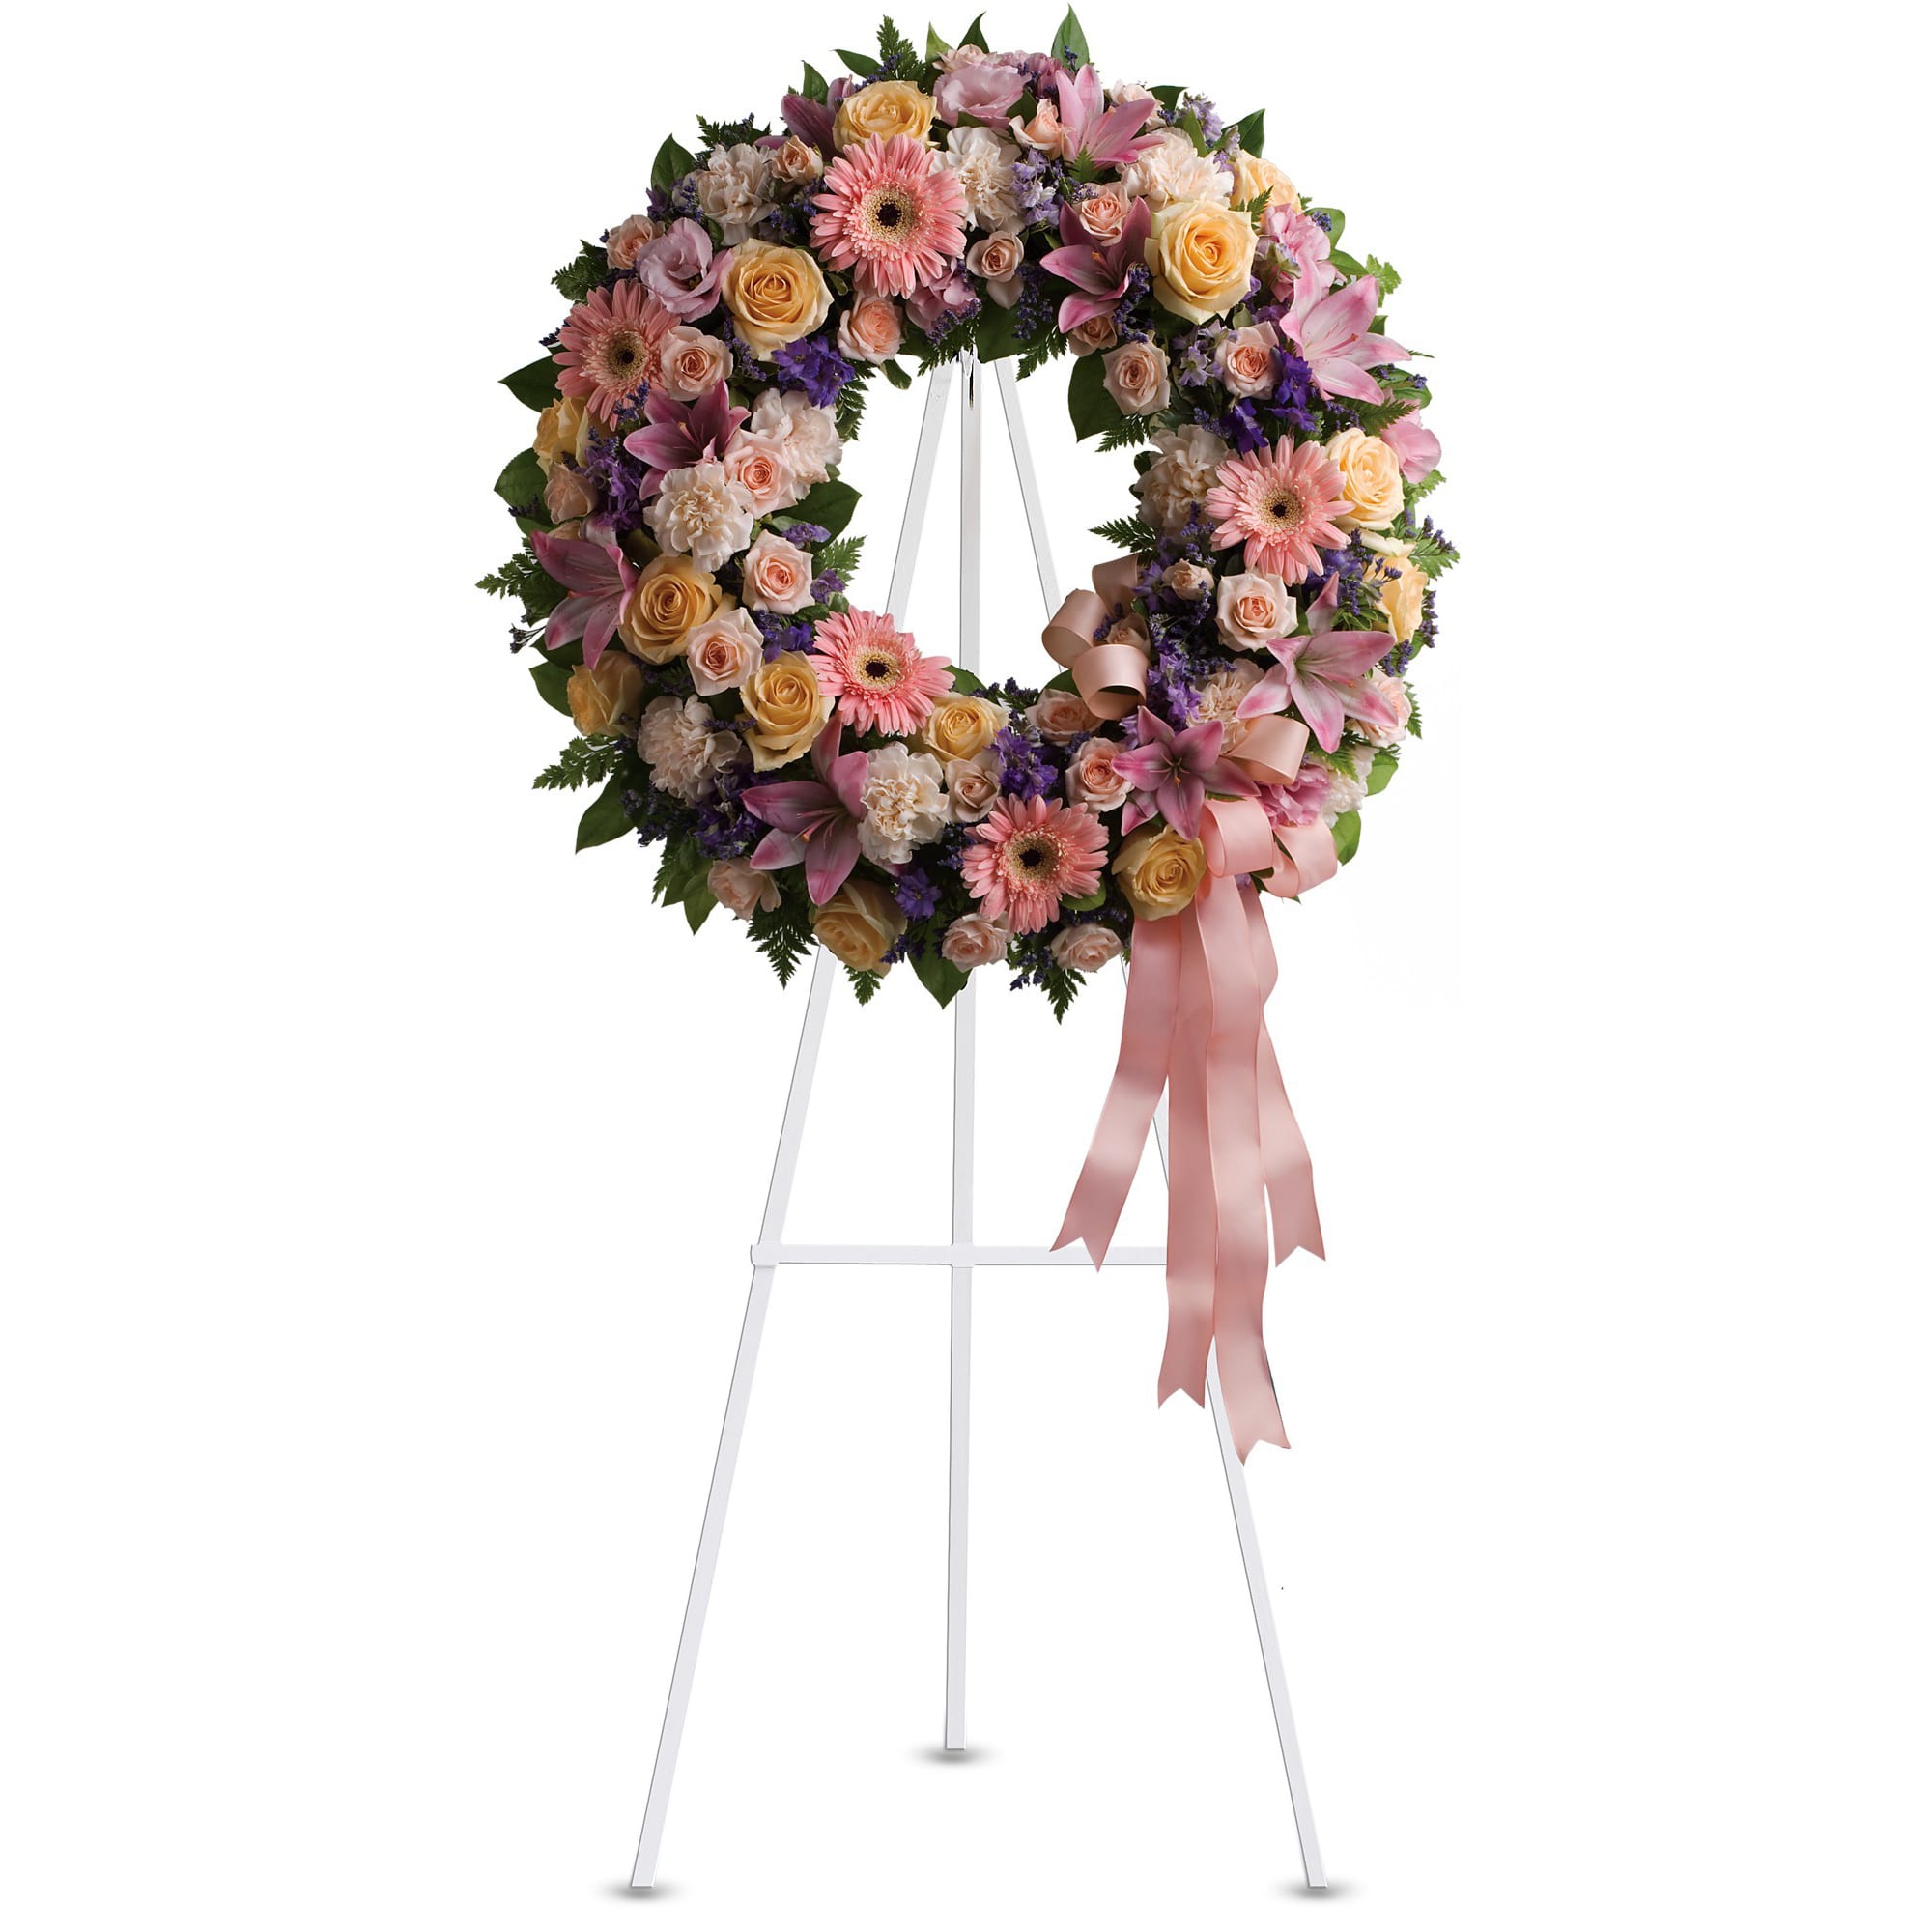 Graceful Wreath by Teleflora - Family and friends will recollect how special their loved one was with this gentle and timeless circle of fragrant blooms to celebrate sweet memories. 